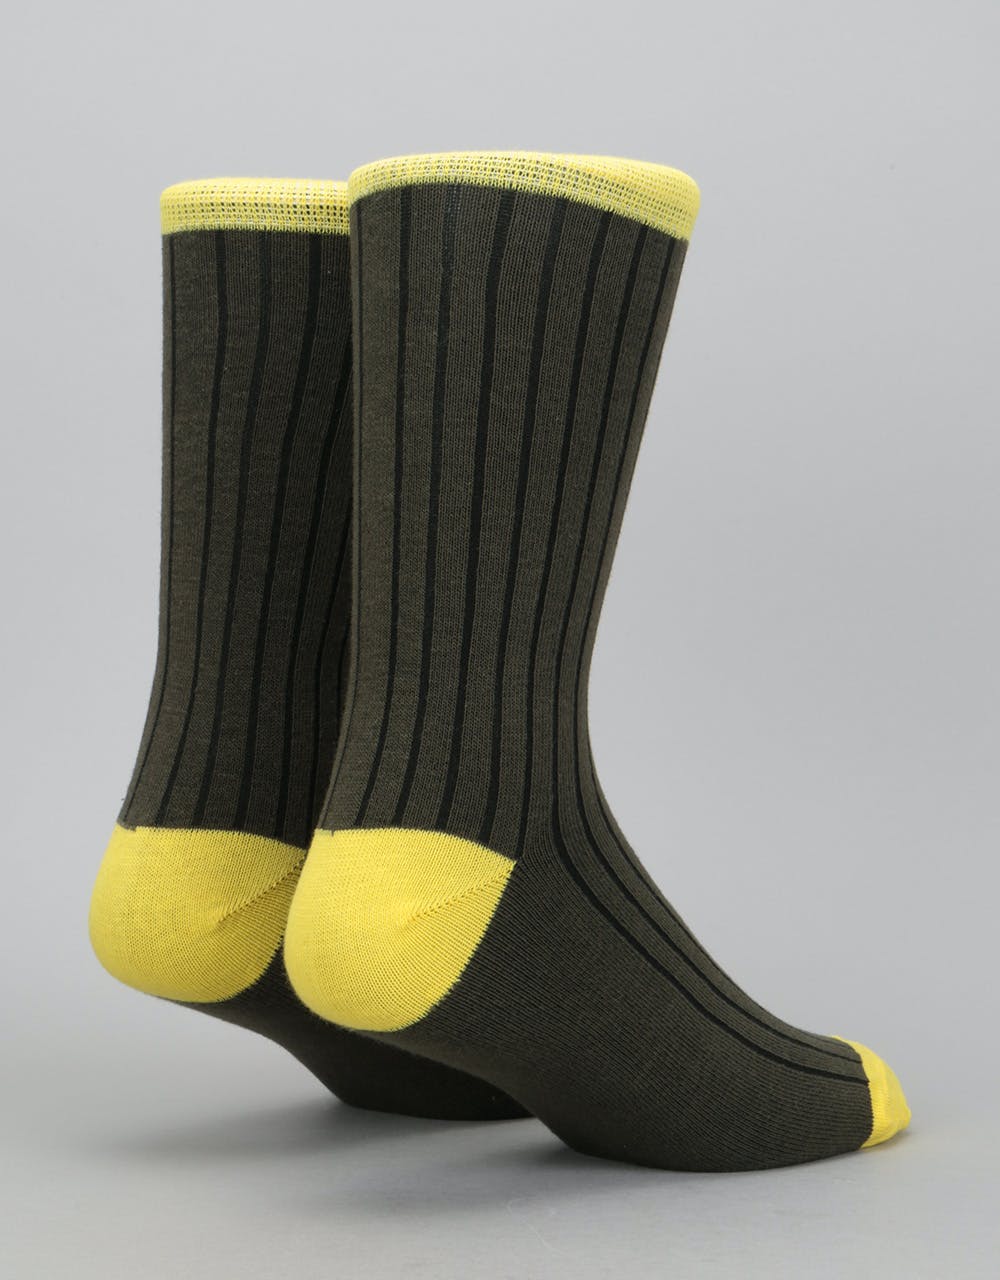 Route One Derby Socks - Brown/Yellow